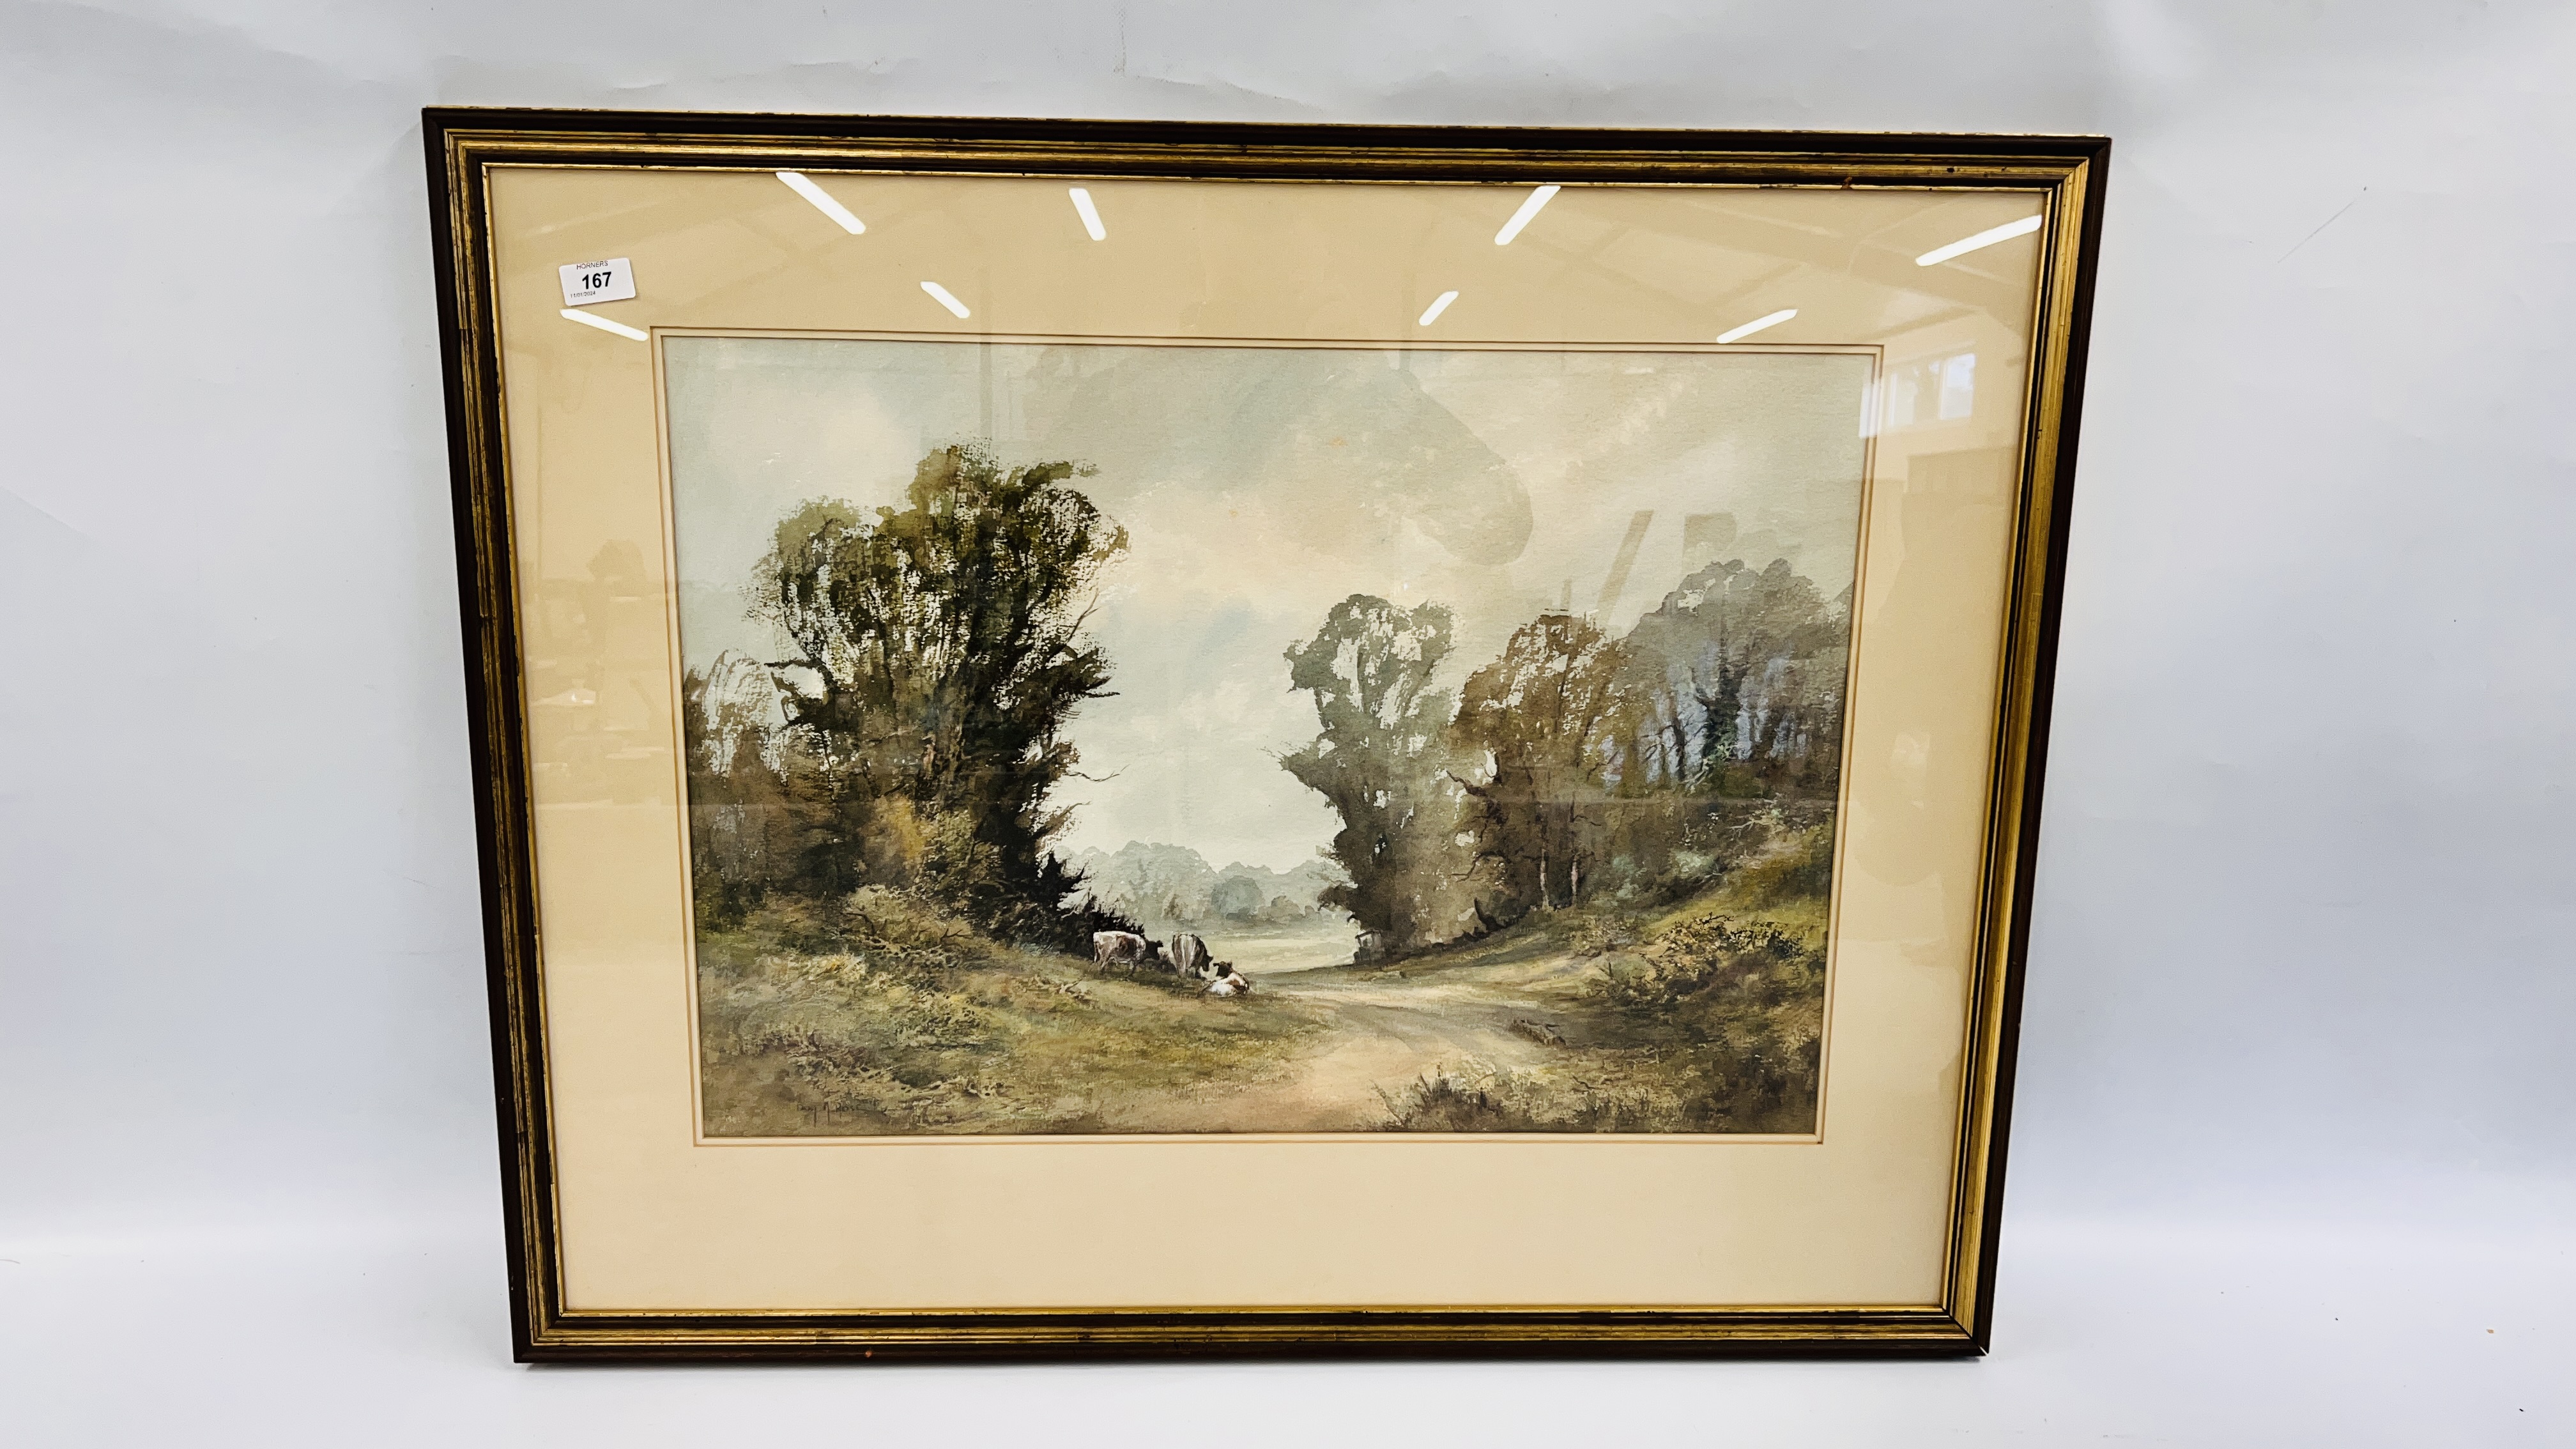 A FRAMED WATERCOLOUR "WENHASTON" DEPICTING GRAZING CATTLE BEARING SIGNATURE D.